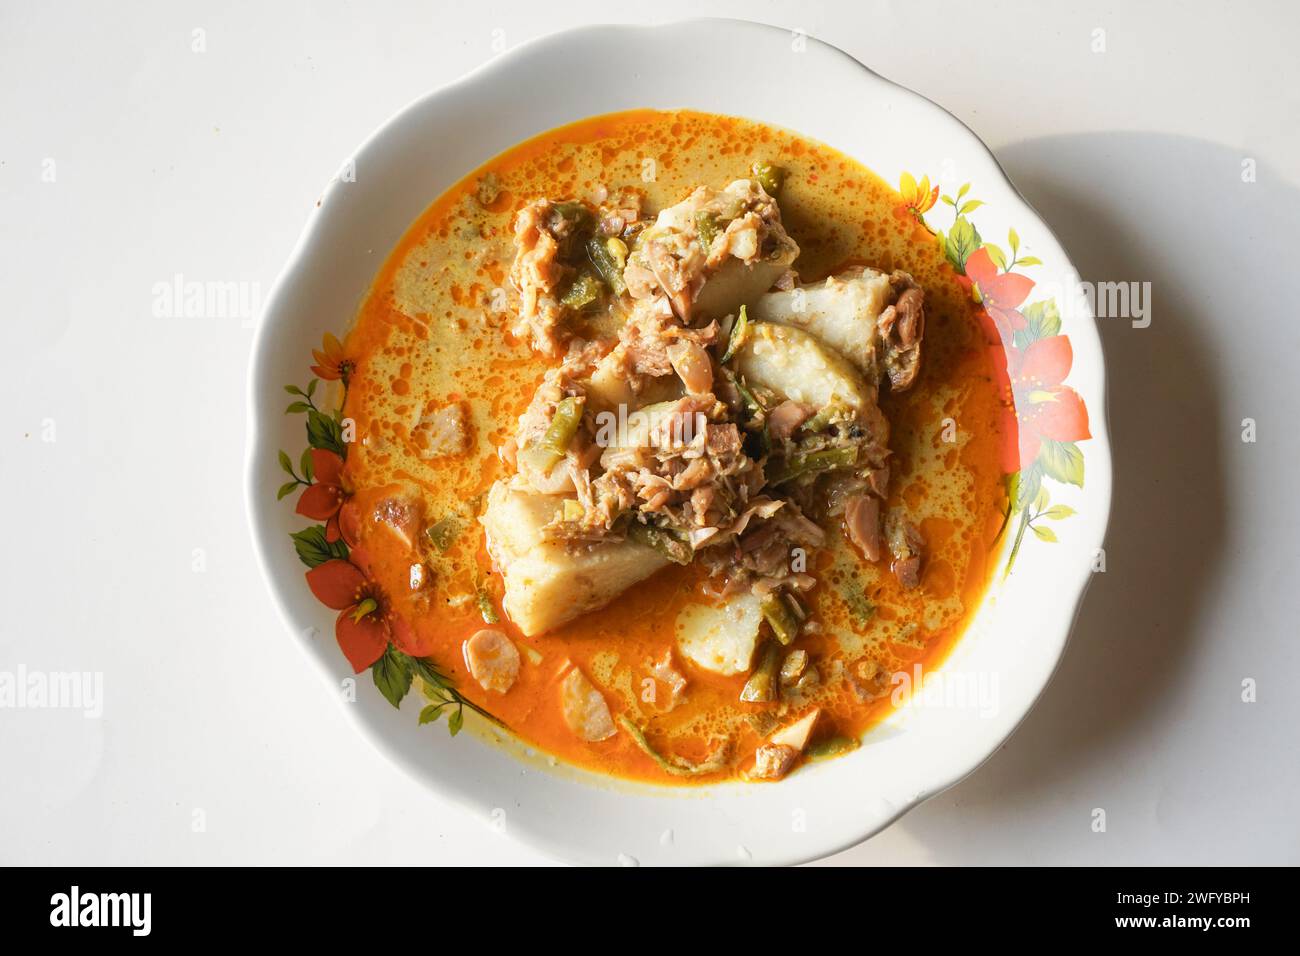 Lontong sayur or vegetable rice cake is a typical Indonesian food on a white plate with an isolated white background Stock Photo